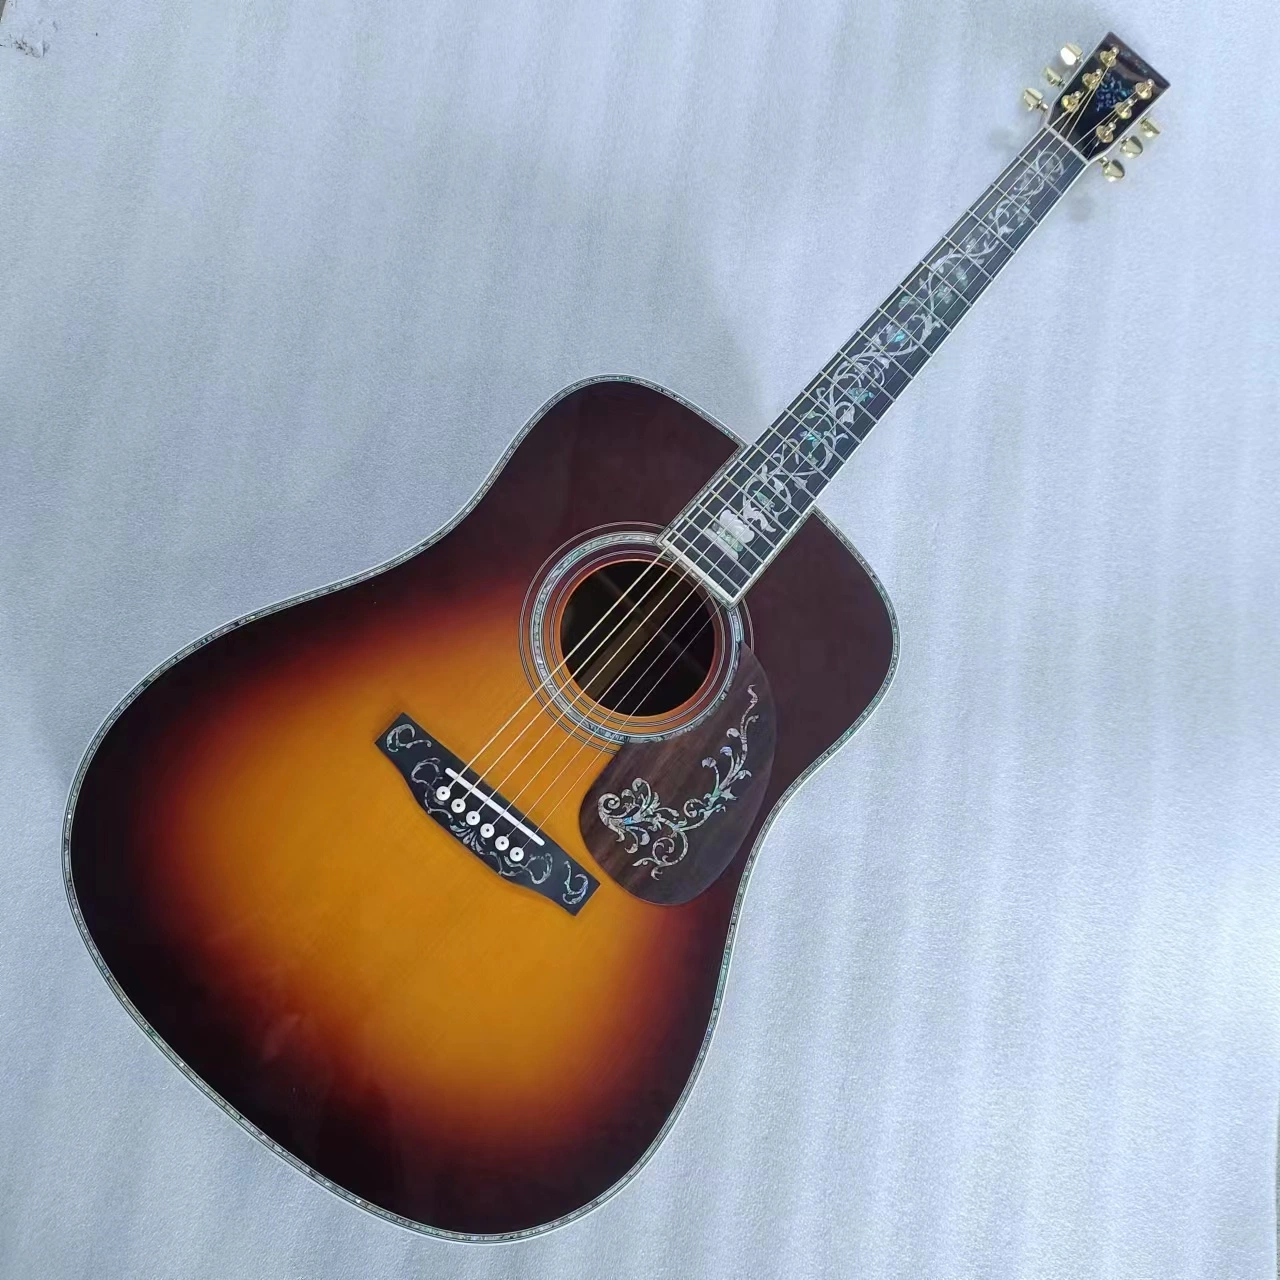 Custom Solid Spruce Top Real Abalone Inlay Dreadnight Guitare acoustique En couleur Sunburst